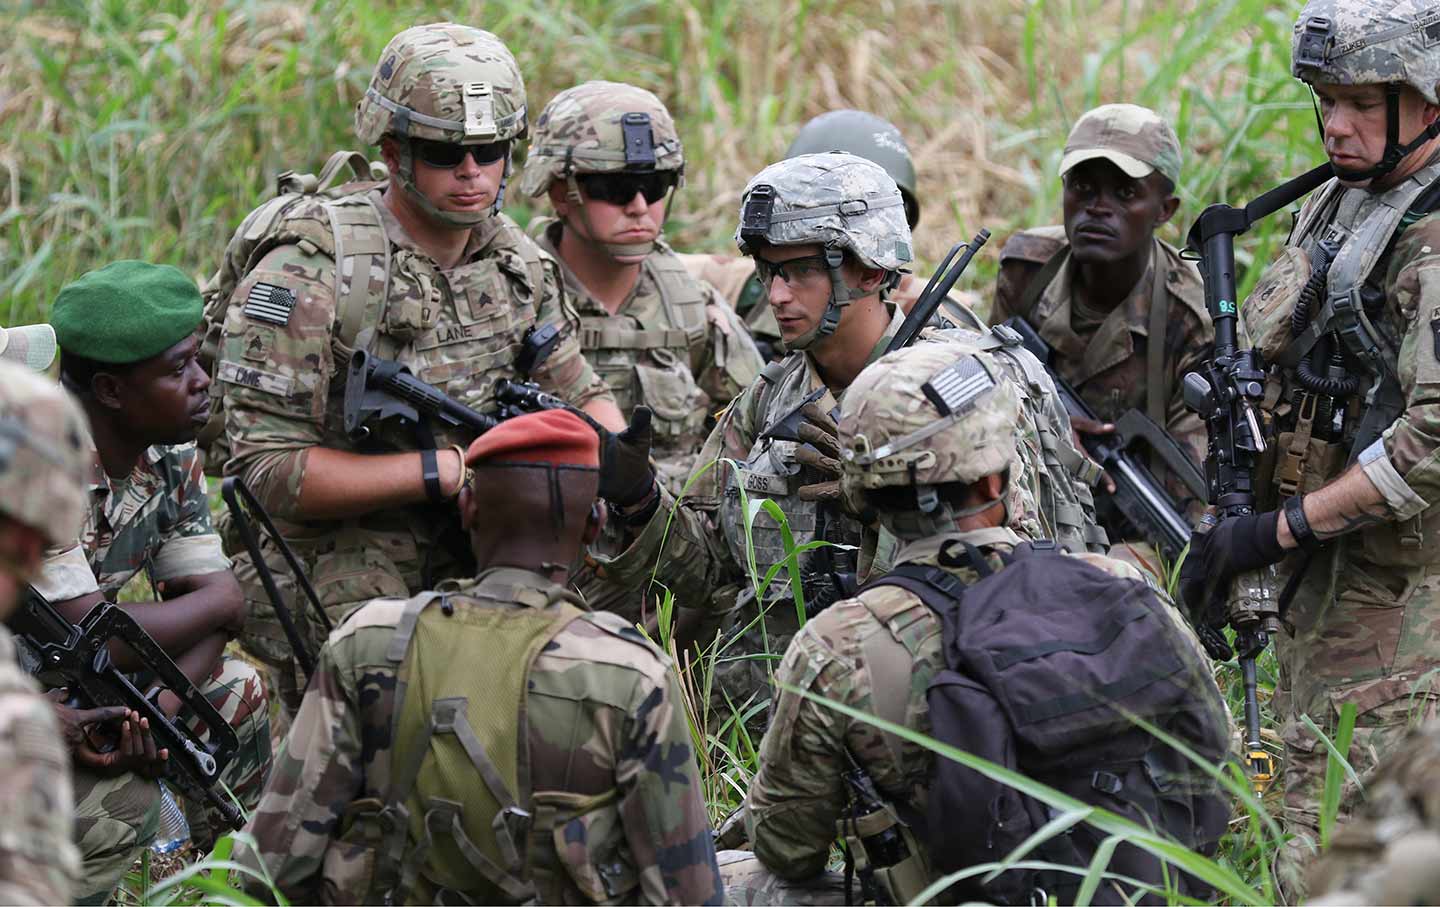 U.S. soldiers in Africa